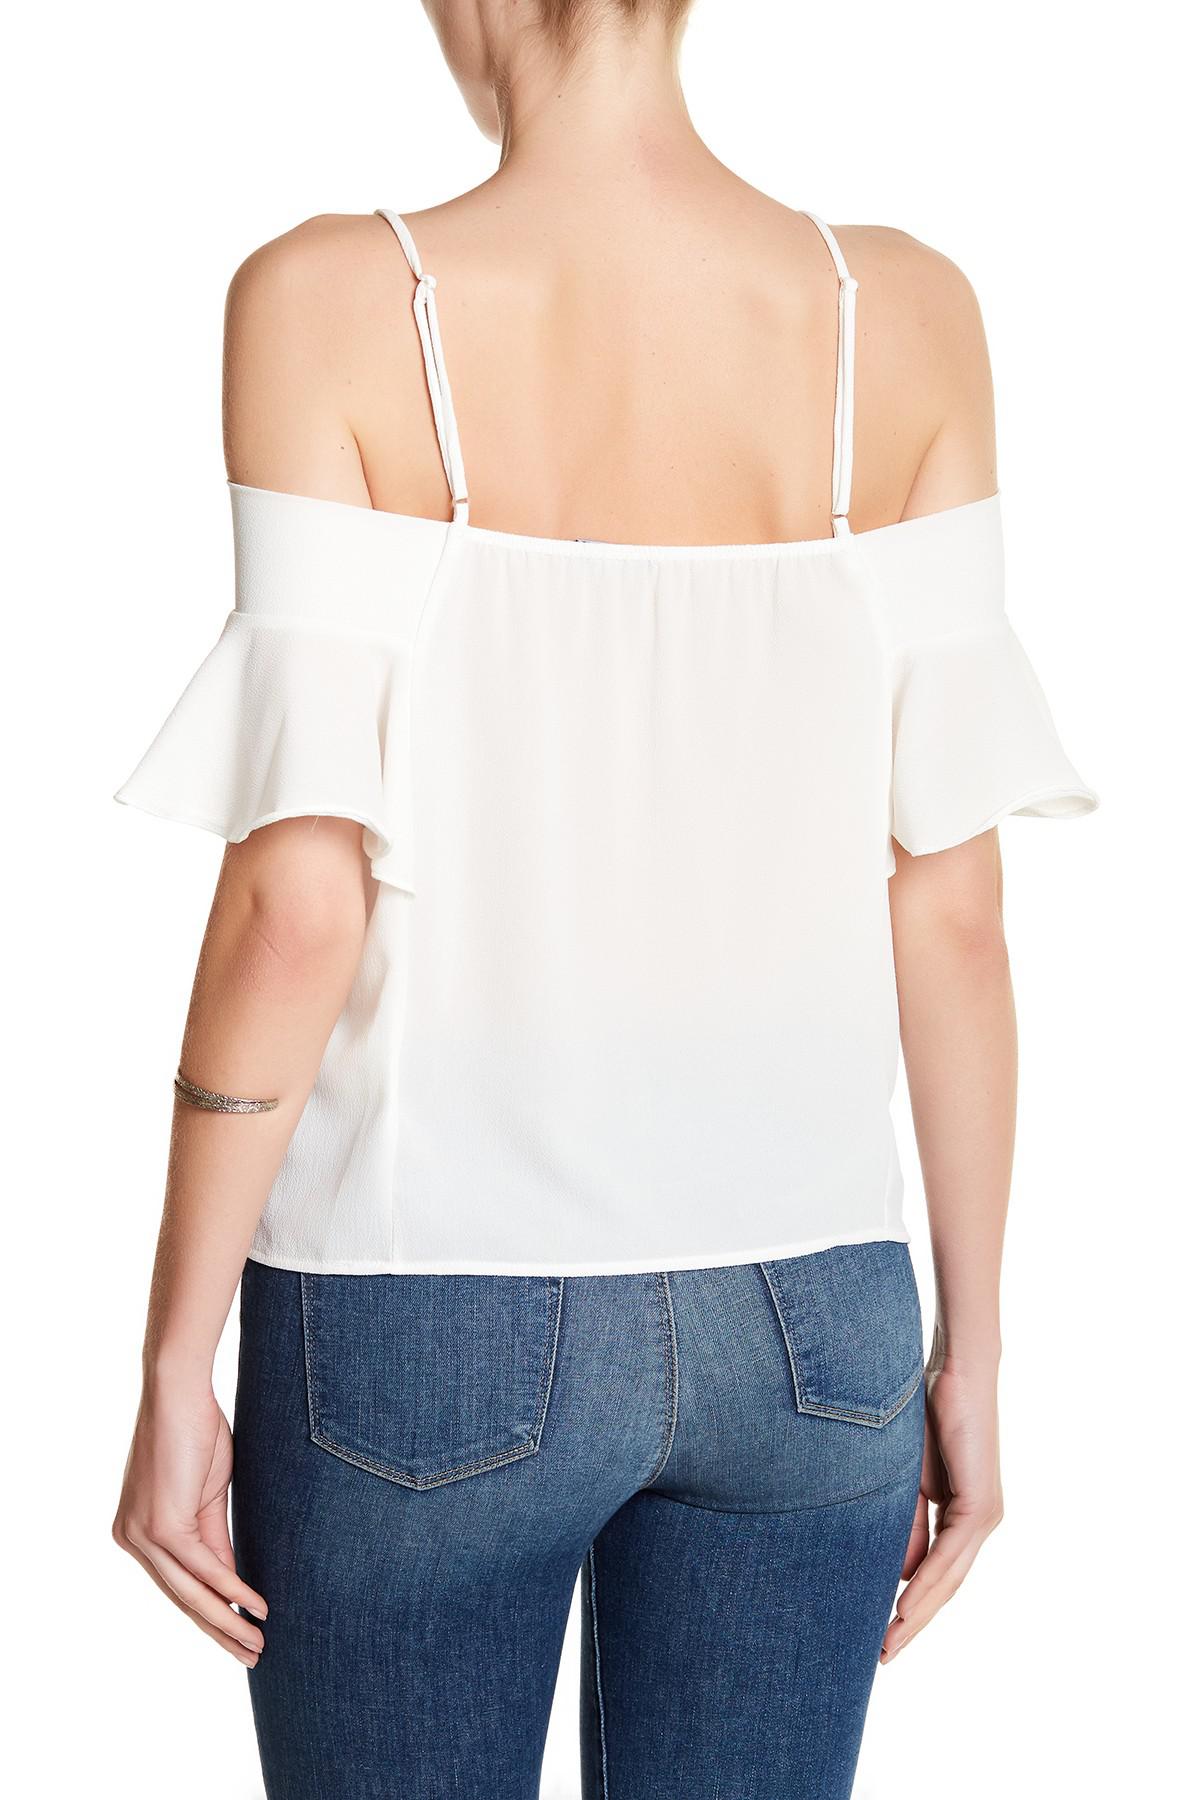 Lyst - West Kei Cold Shoulder Spaghetti Strap Shirt in White